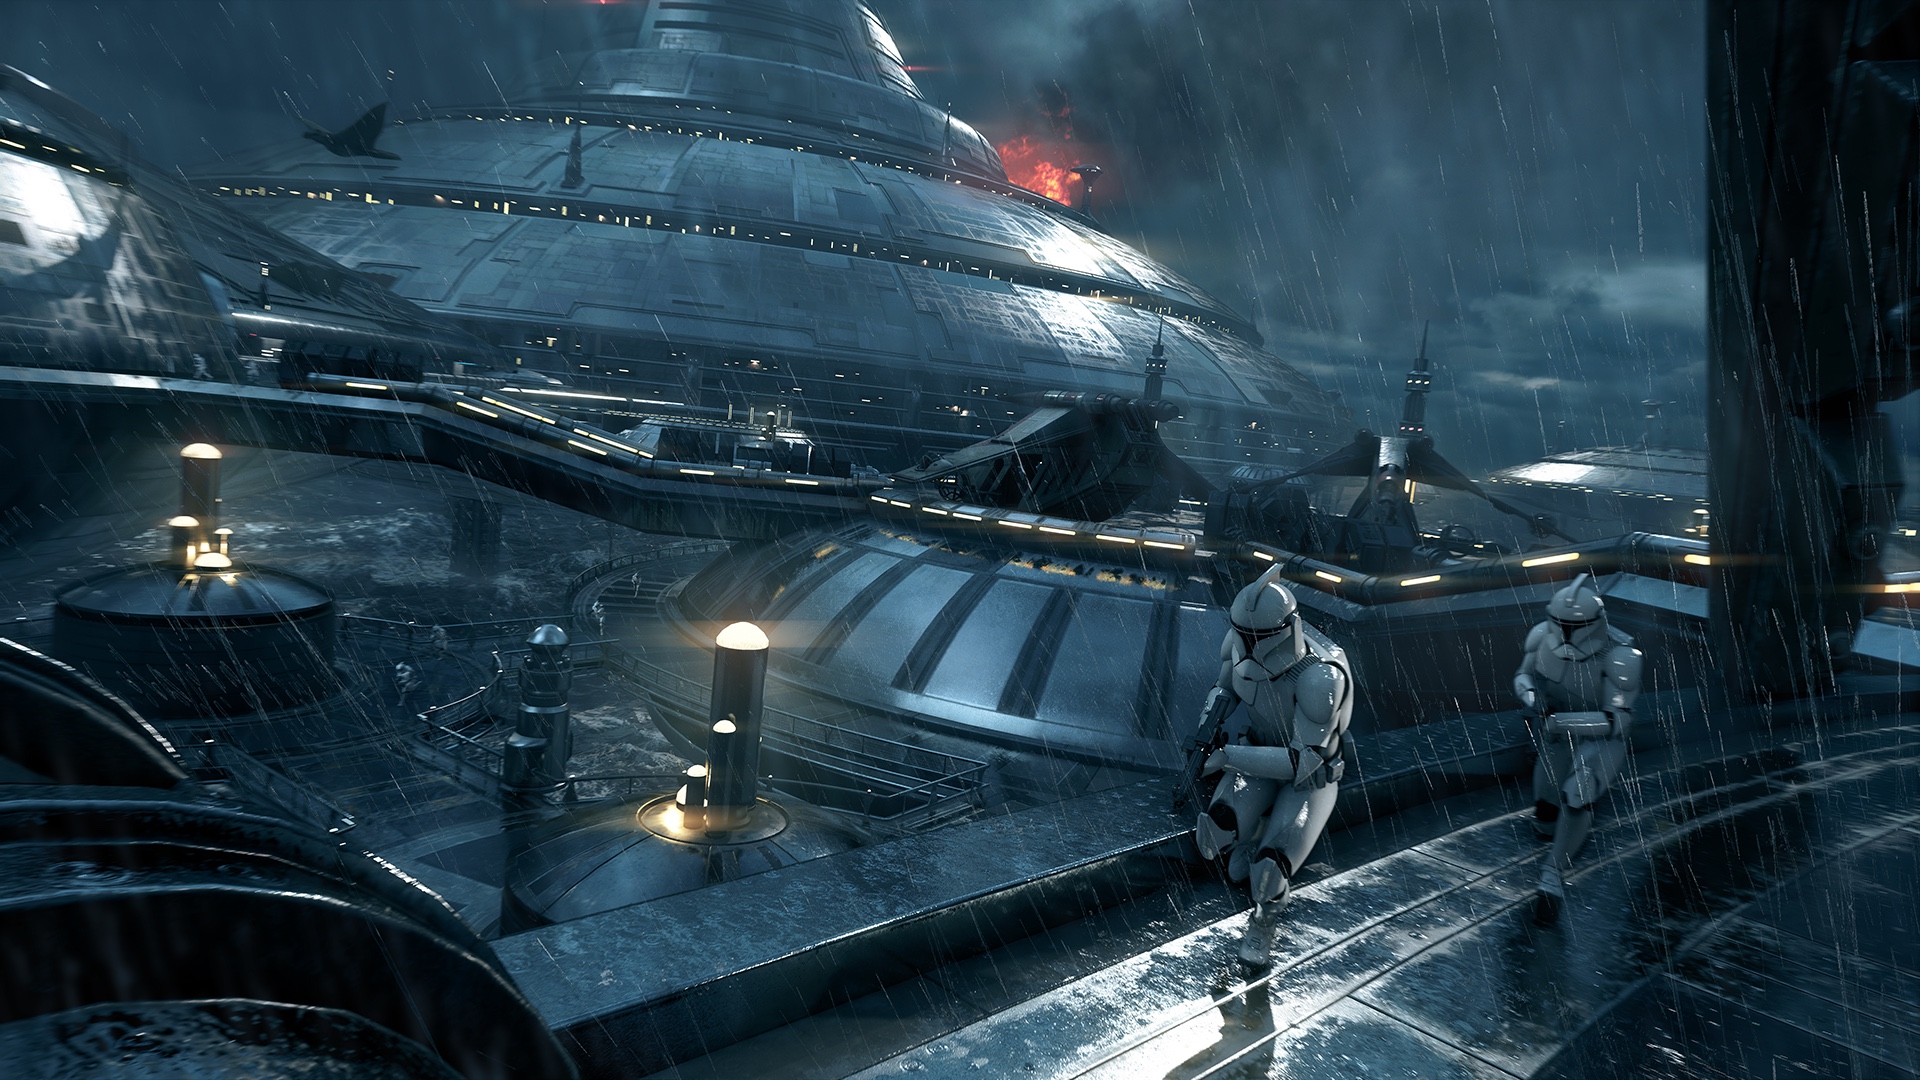 Star Wars Spaceship Star Wars Episode Ii The Attack Of The Clones Science Fiction Storm Gloomy 1920x1080